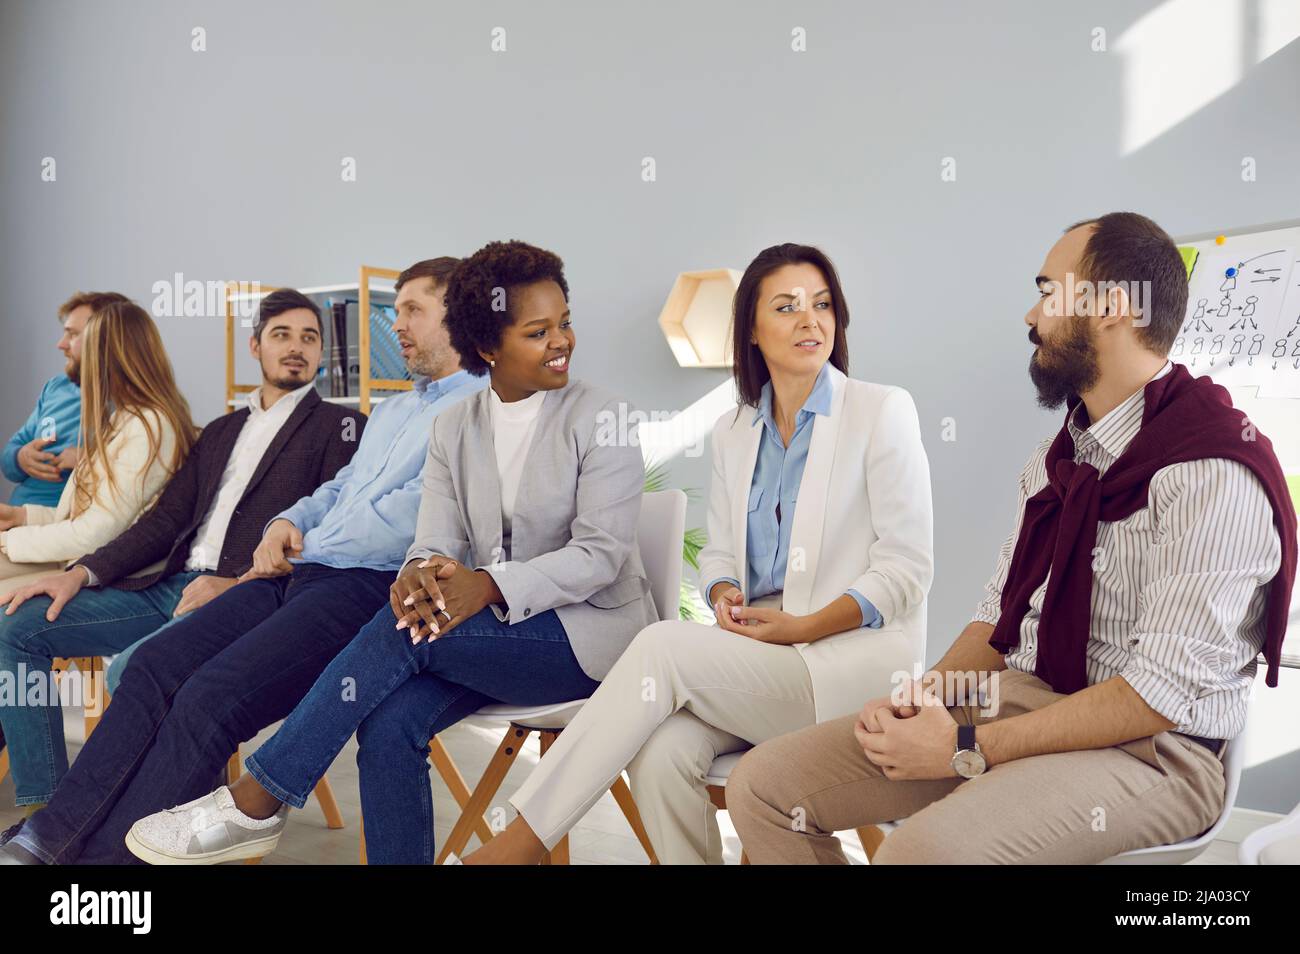 Different groups of people communicate with each other during business seminar or training. Stock Photo